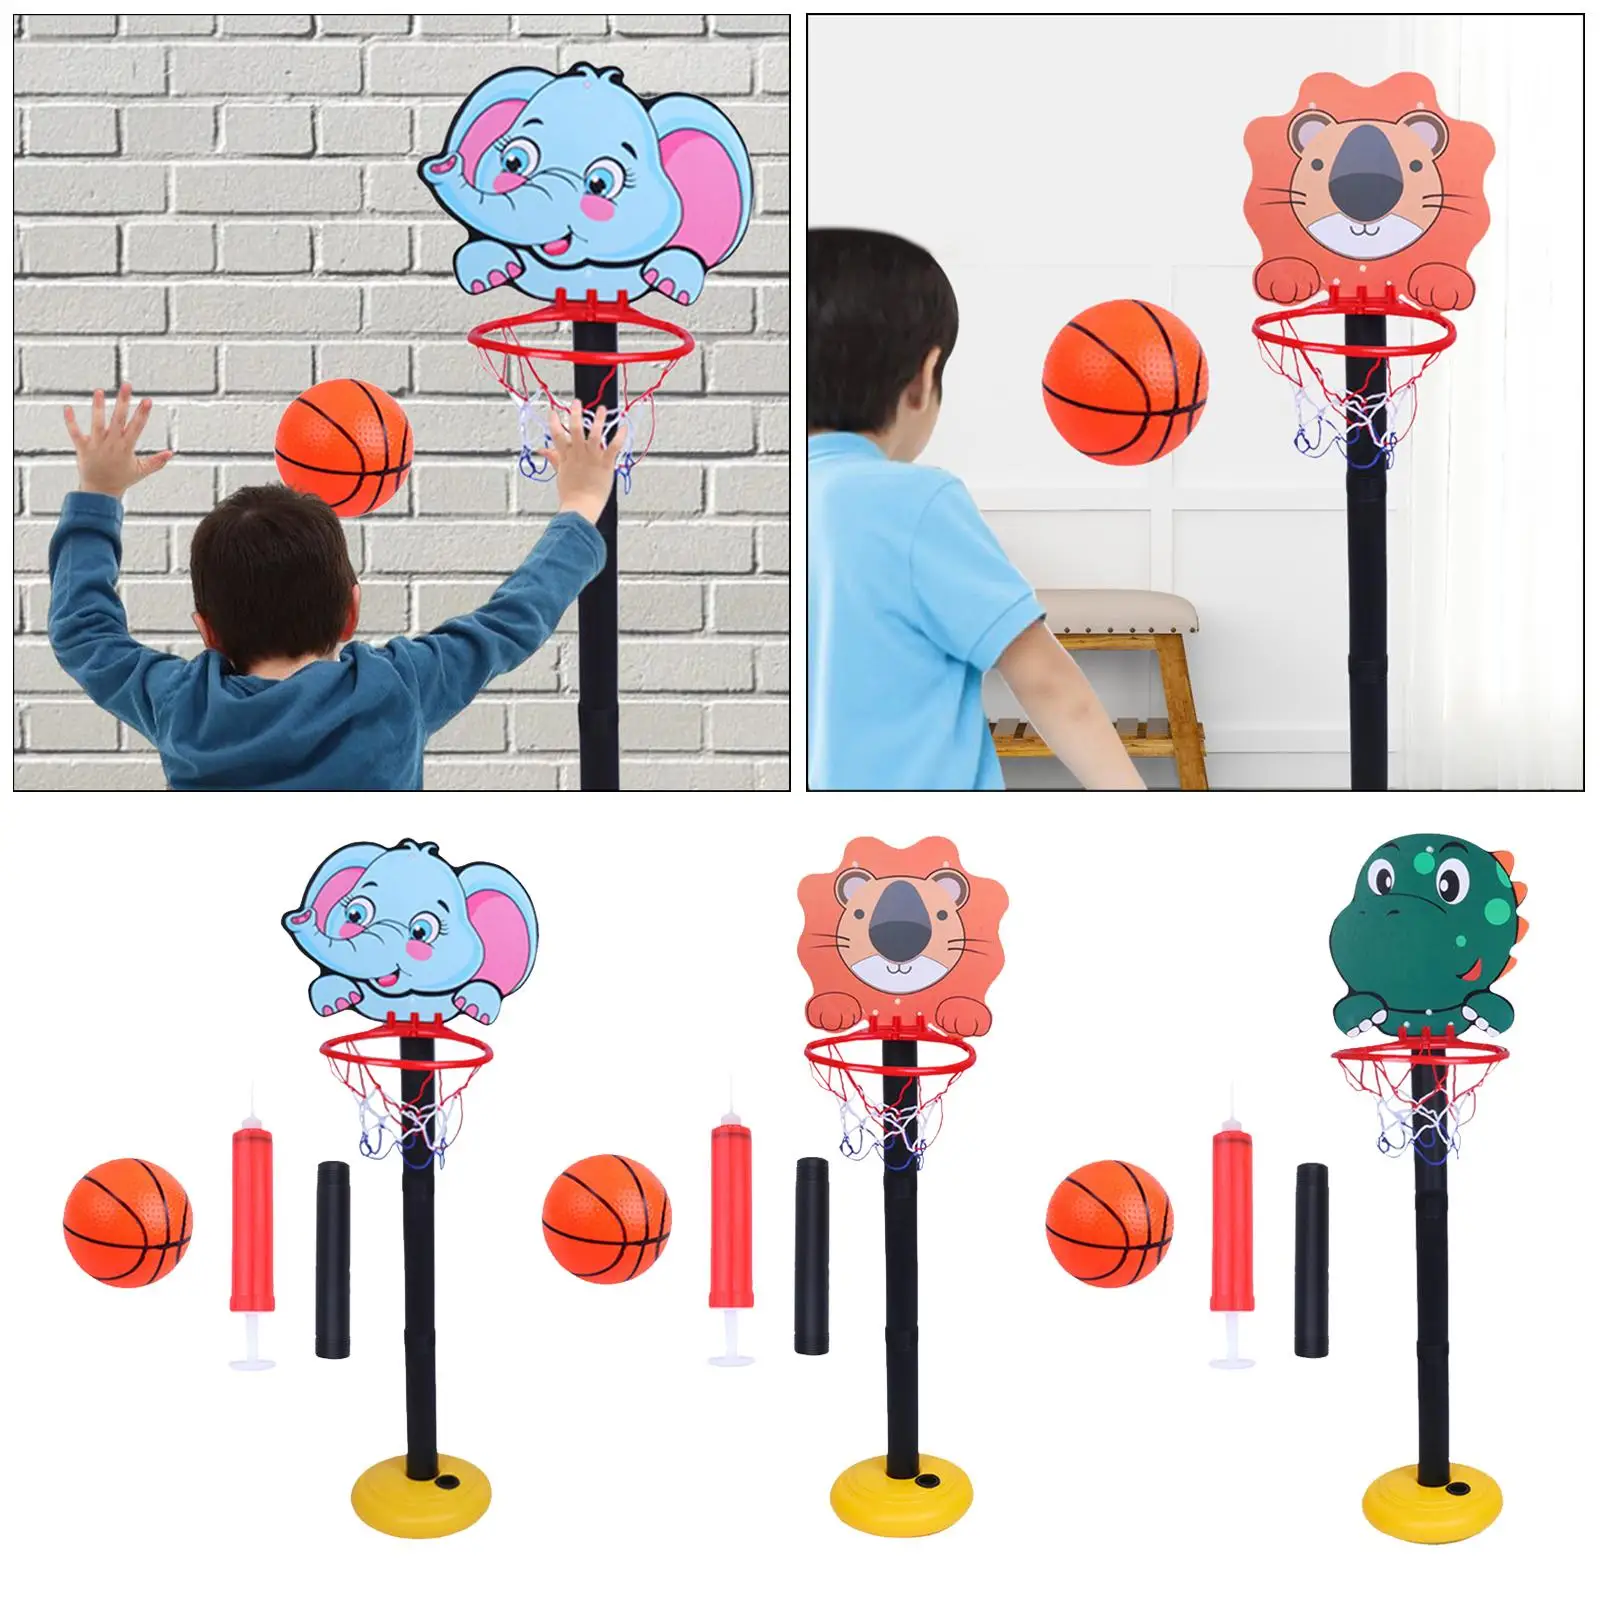 Portable Basketball Hoop Toys Outdoor Sports Playing Set Balls Playset Mini Basketball Set for Indoor Wall Office Outdoor Garden